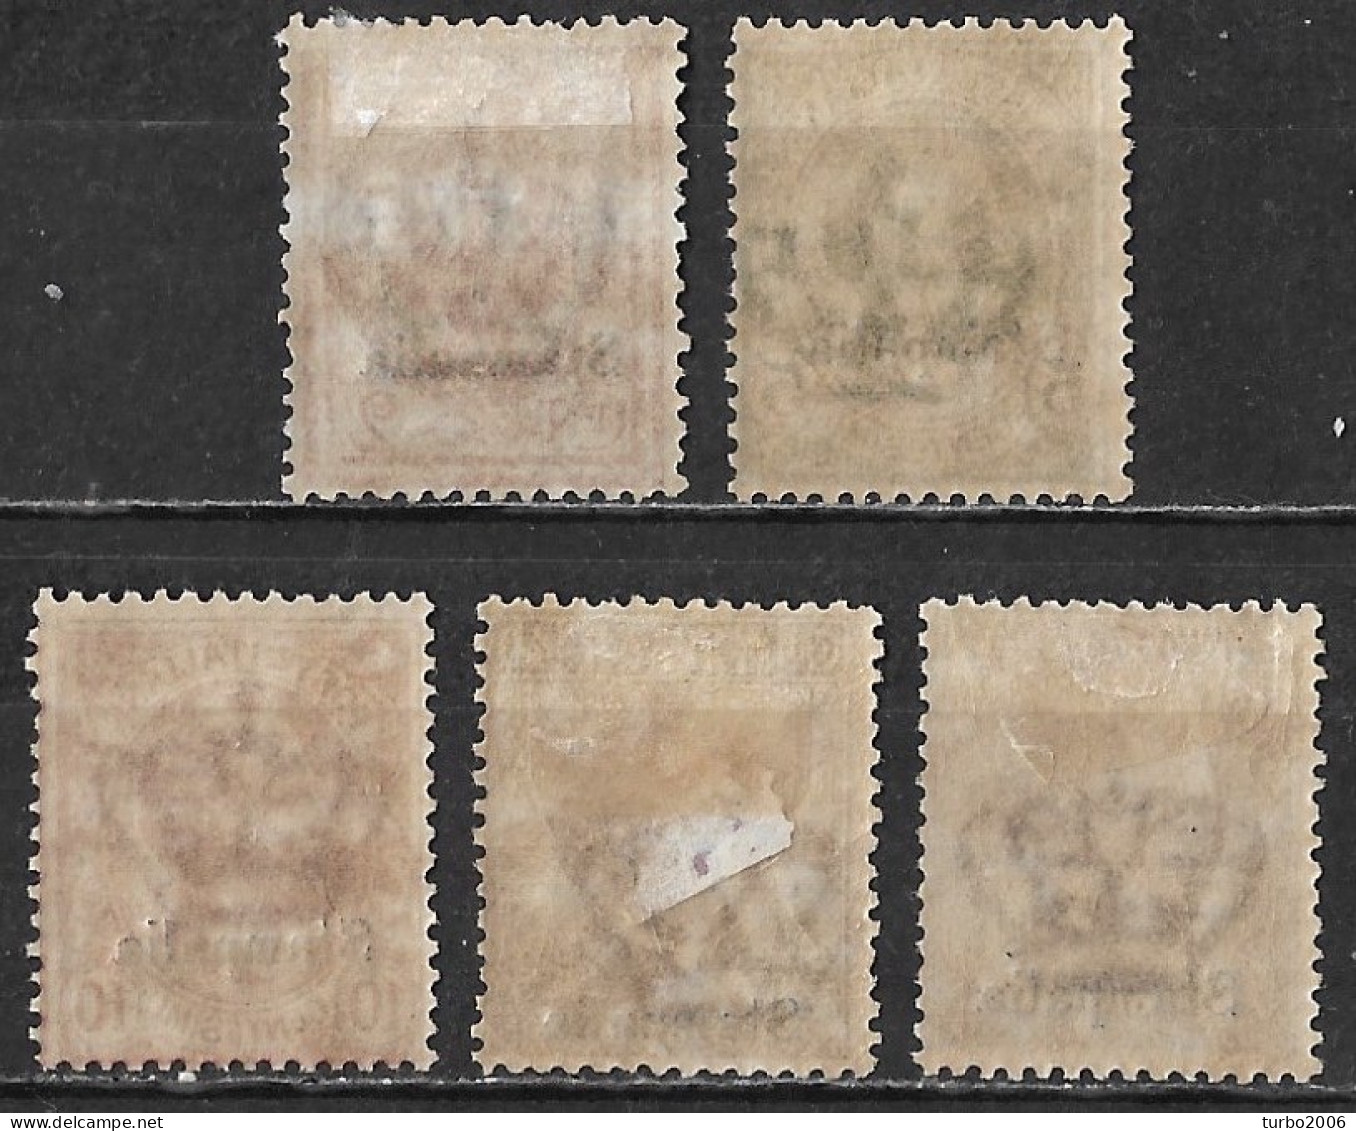 DODECANESE 1912 Italian Stamps With Black Overprint STAMPALIA 5 Values From The Set Vl. 1/3-6-7 MH - Dodecaneso